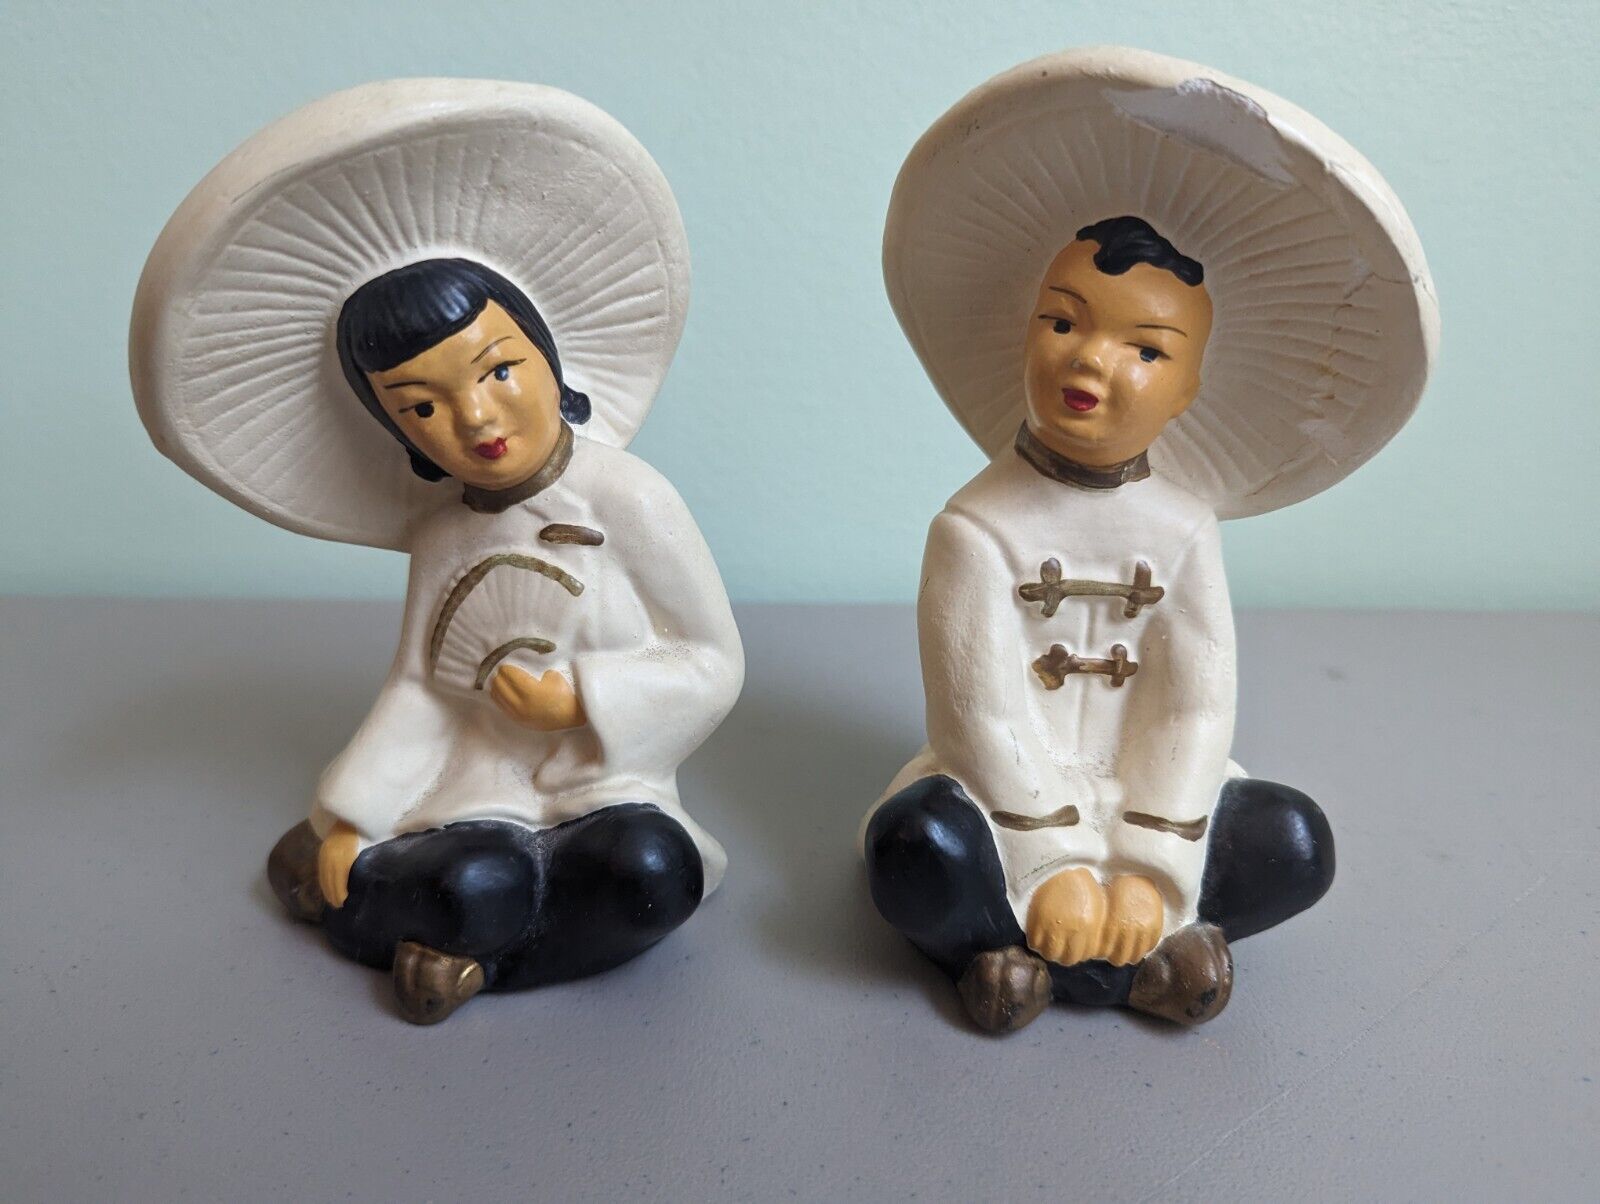 TWO VINTAGE 1950’s CHALKWARE ASIAN CHINESE CHALKWARE FIGURINES UNIVERSAL COUPLE